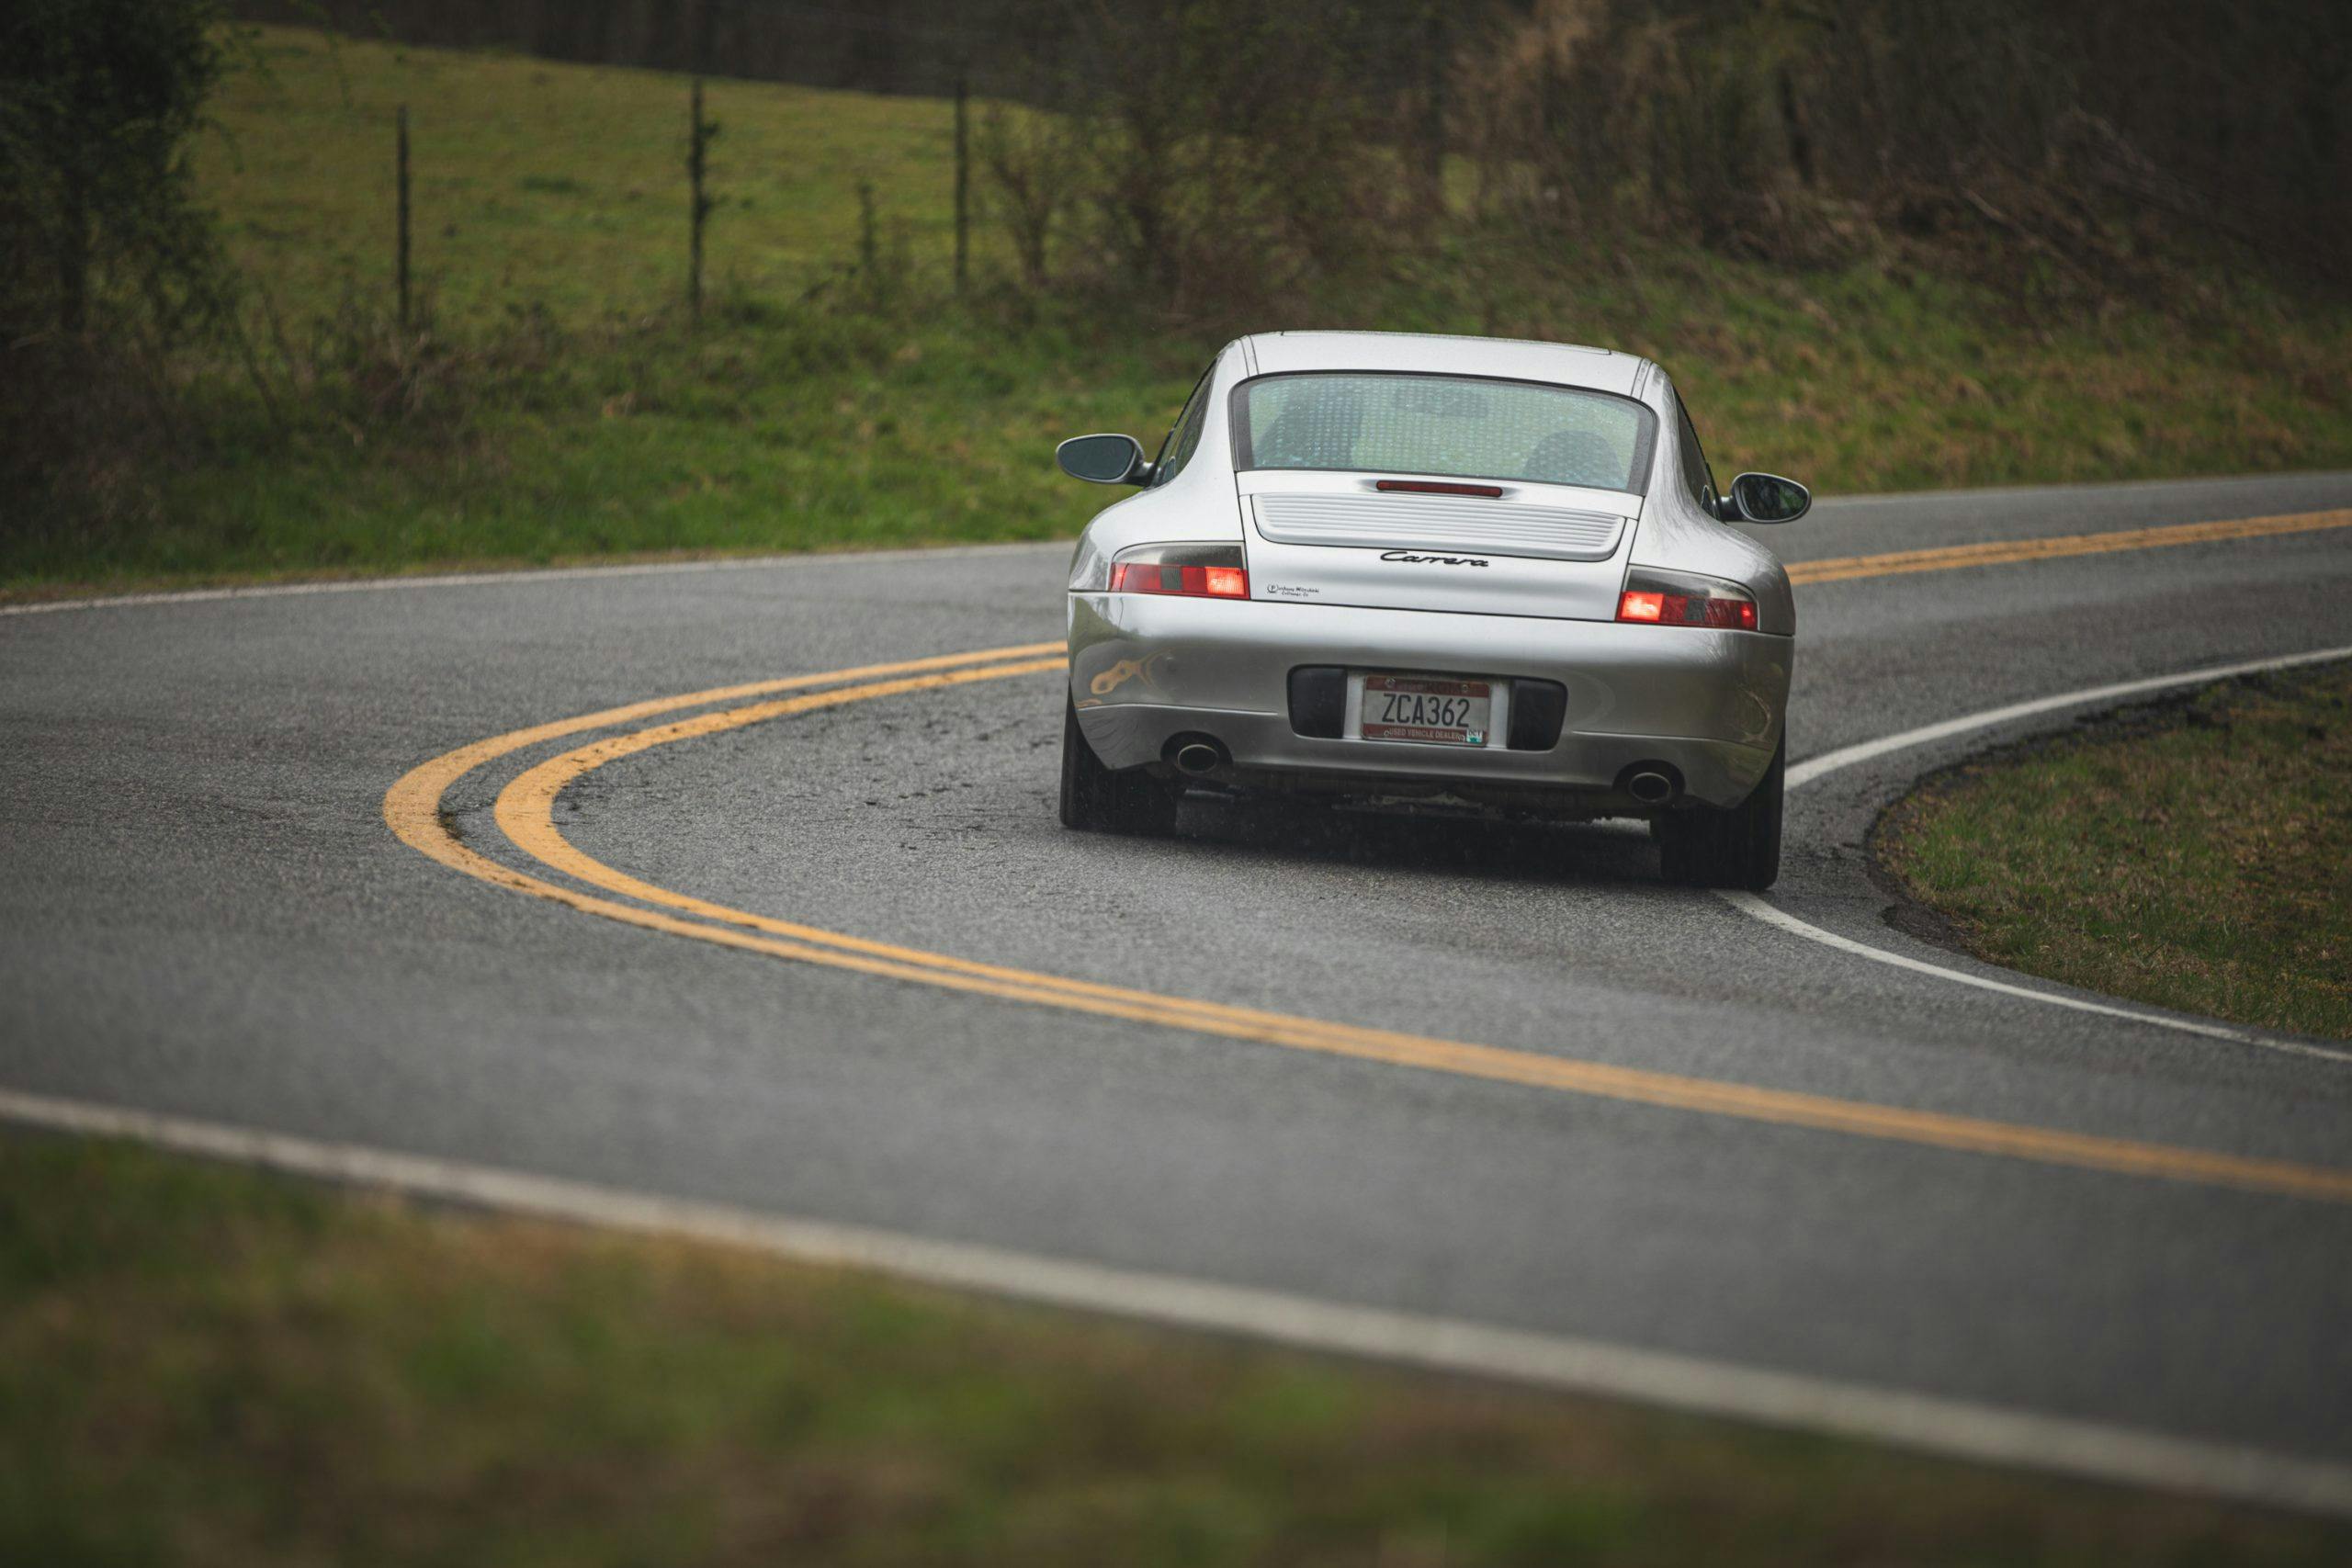 Raby's Porsche rear driving cornering action